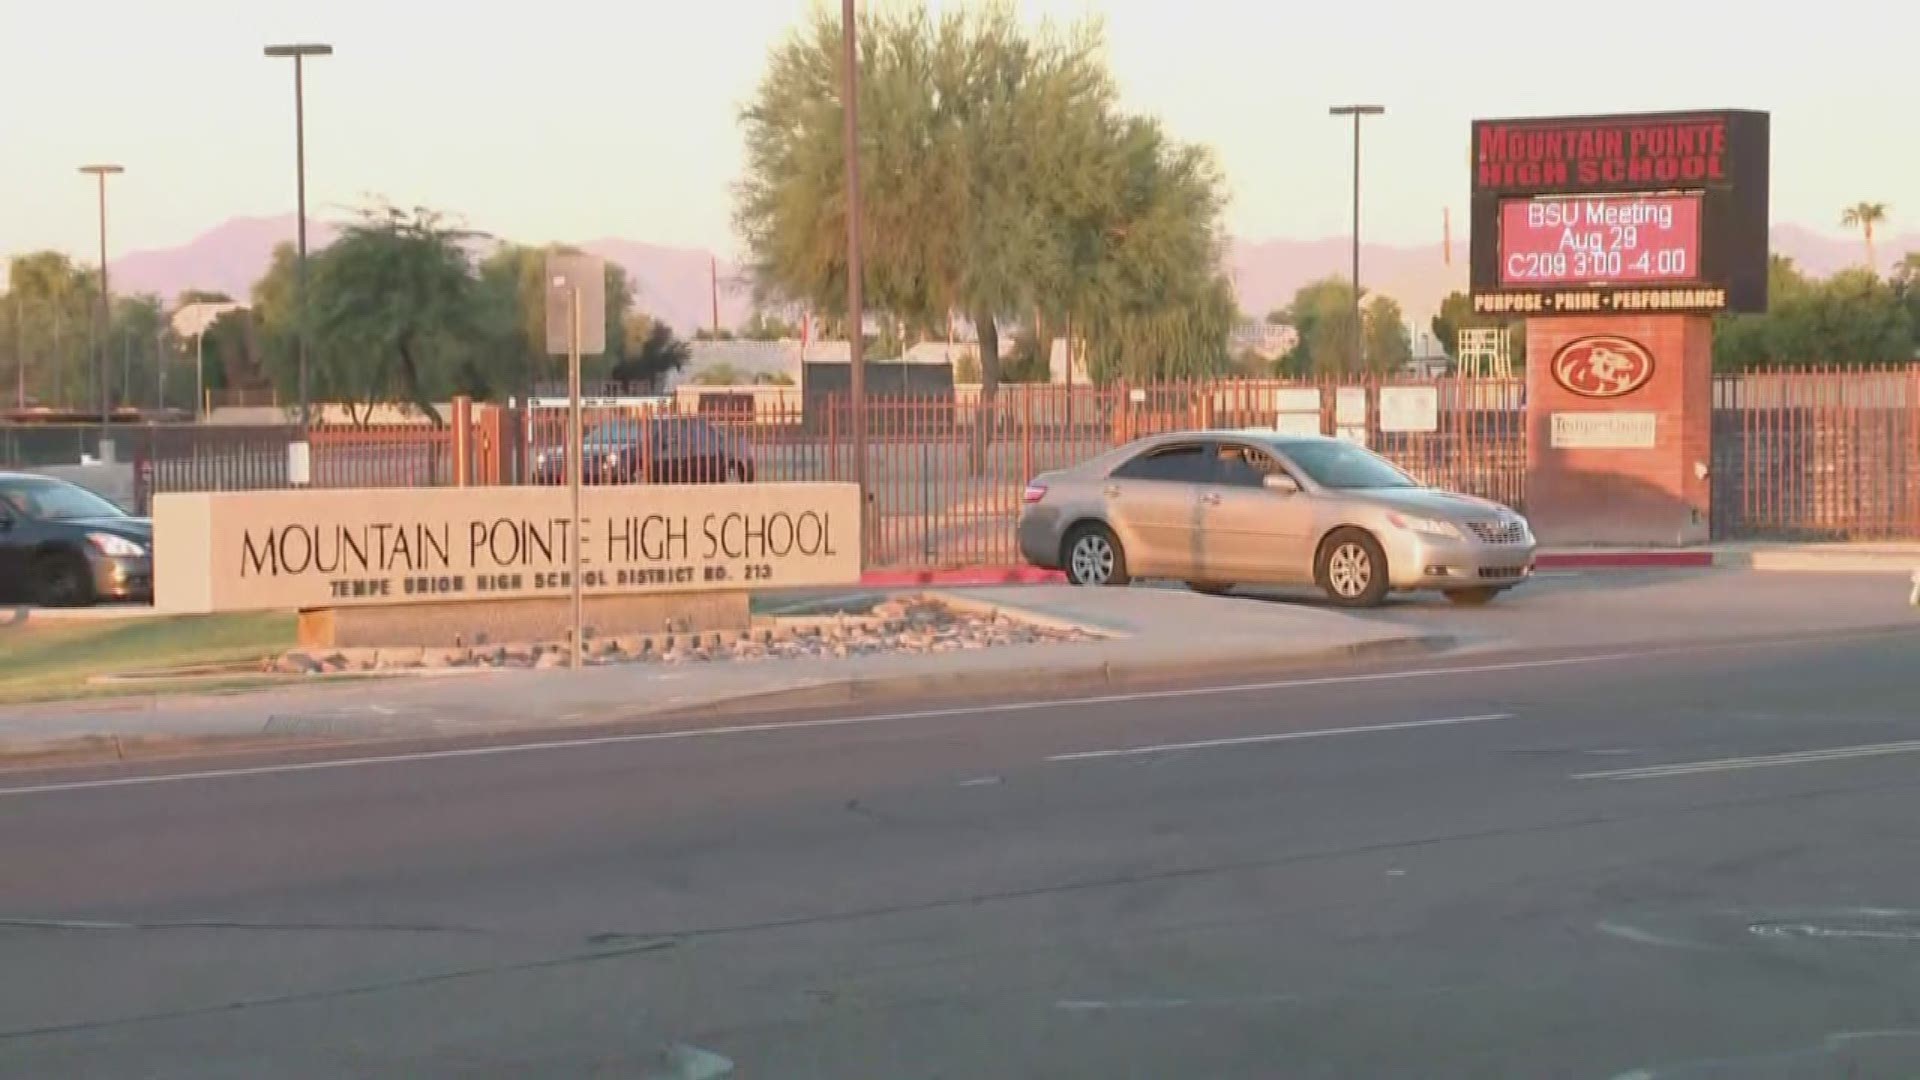 A 14-year-old was arrested Thursday after posting threatening messages on social media, according to the Tempe Police Department. The teen could be facing "several charges."